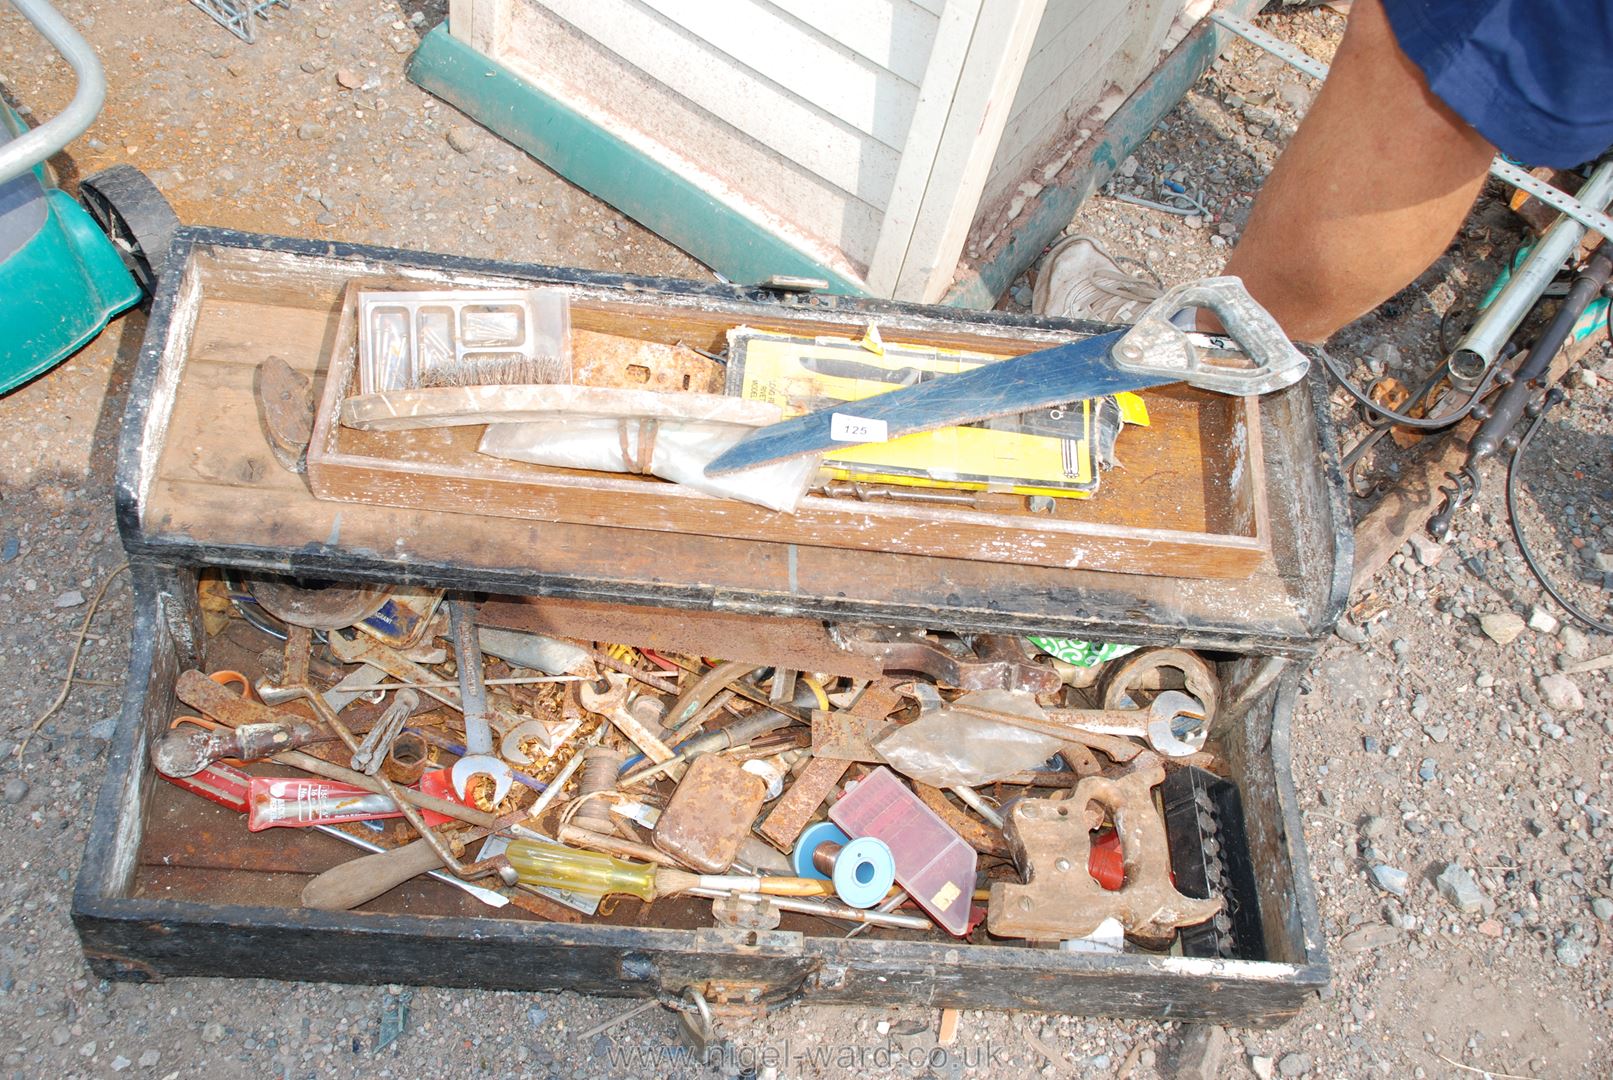 Large wooden tool box containing spanners and tools, etc.